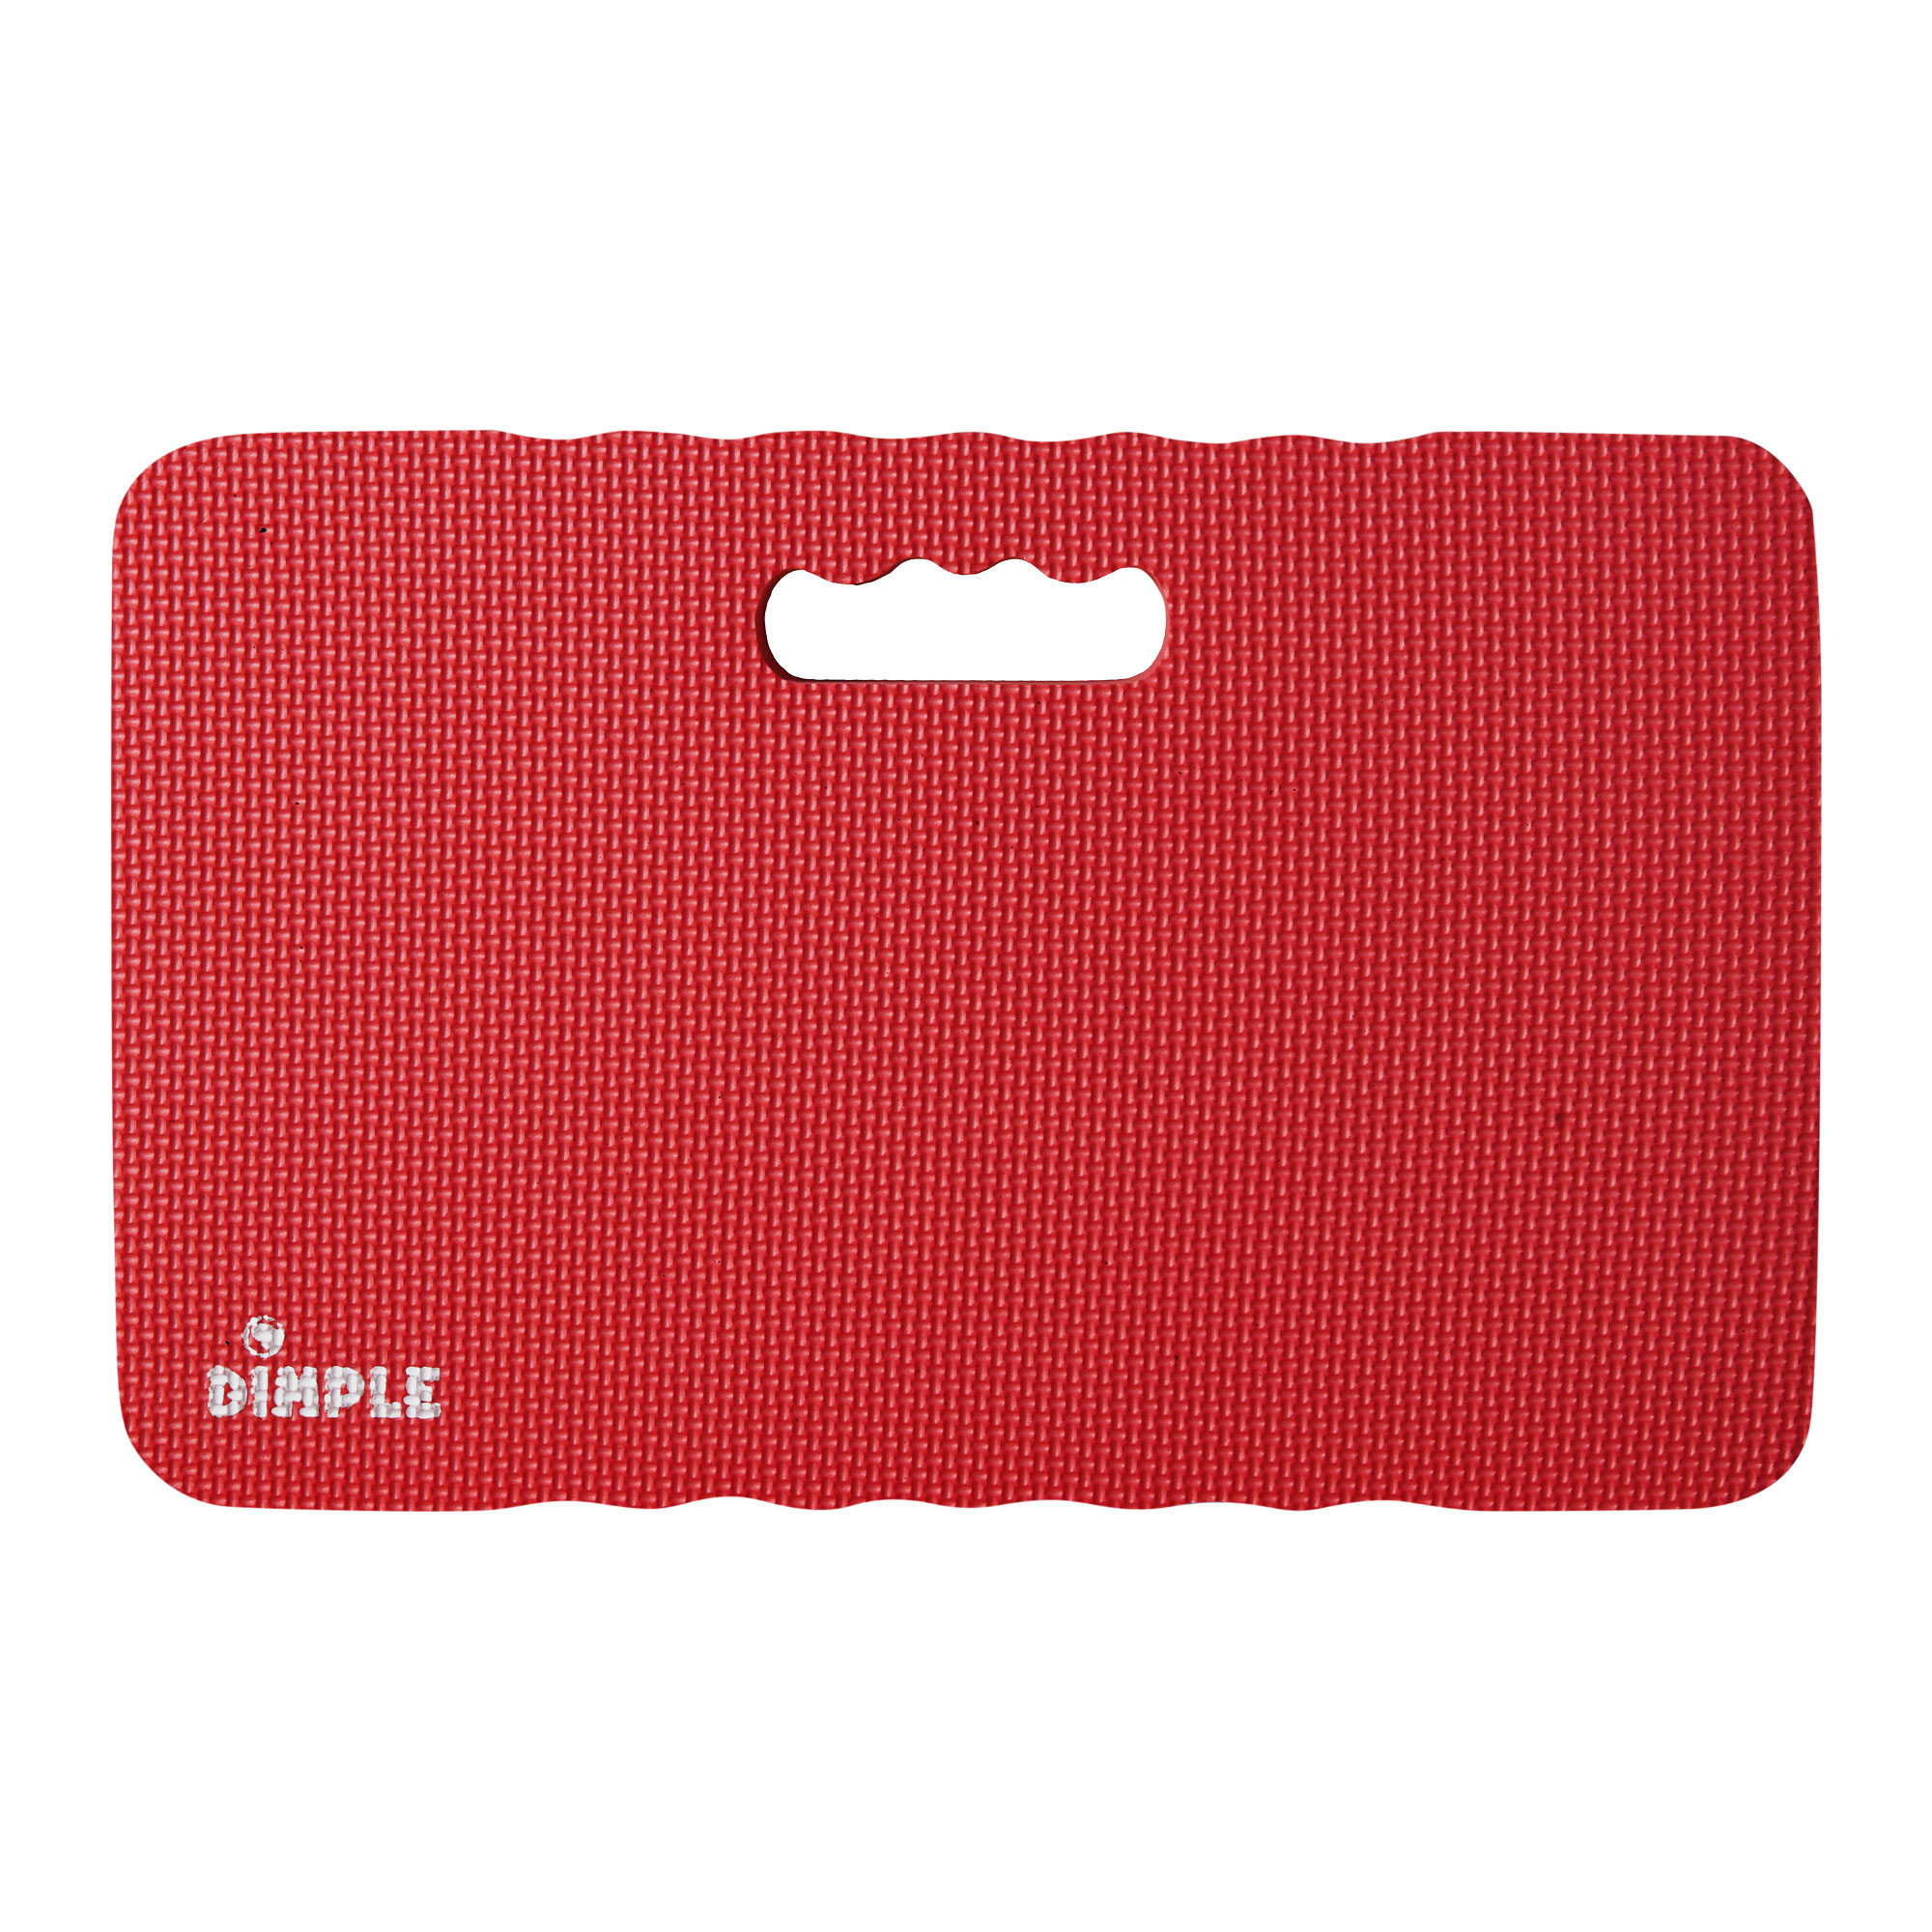 Dimple High Density 1.5 Thick Foam Comfort Kneeling Pad Mats For Gardening Knee Support, Exercise, Yoga Mat, Garden Cushions (Red)